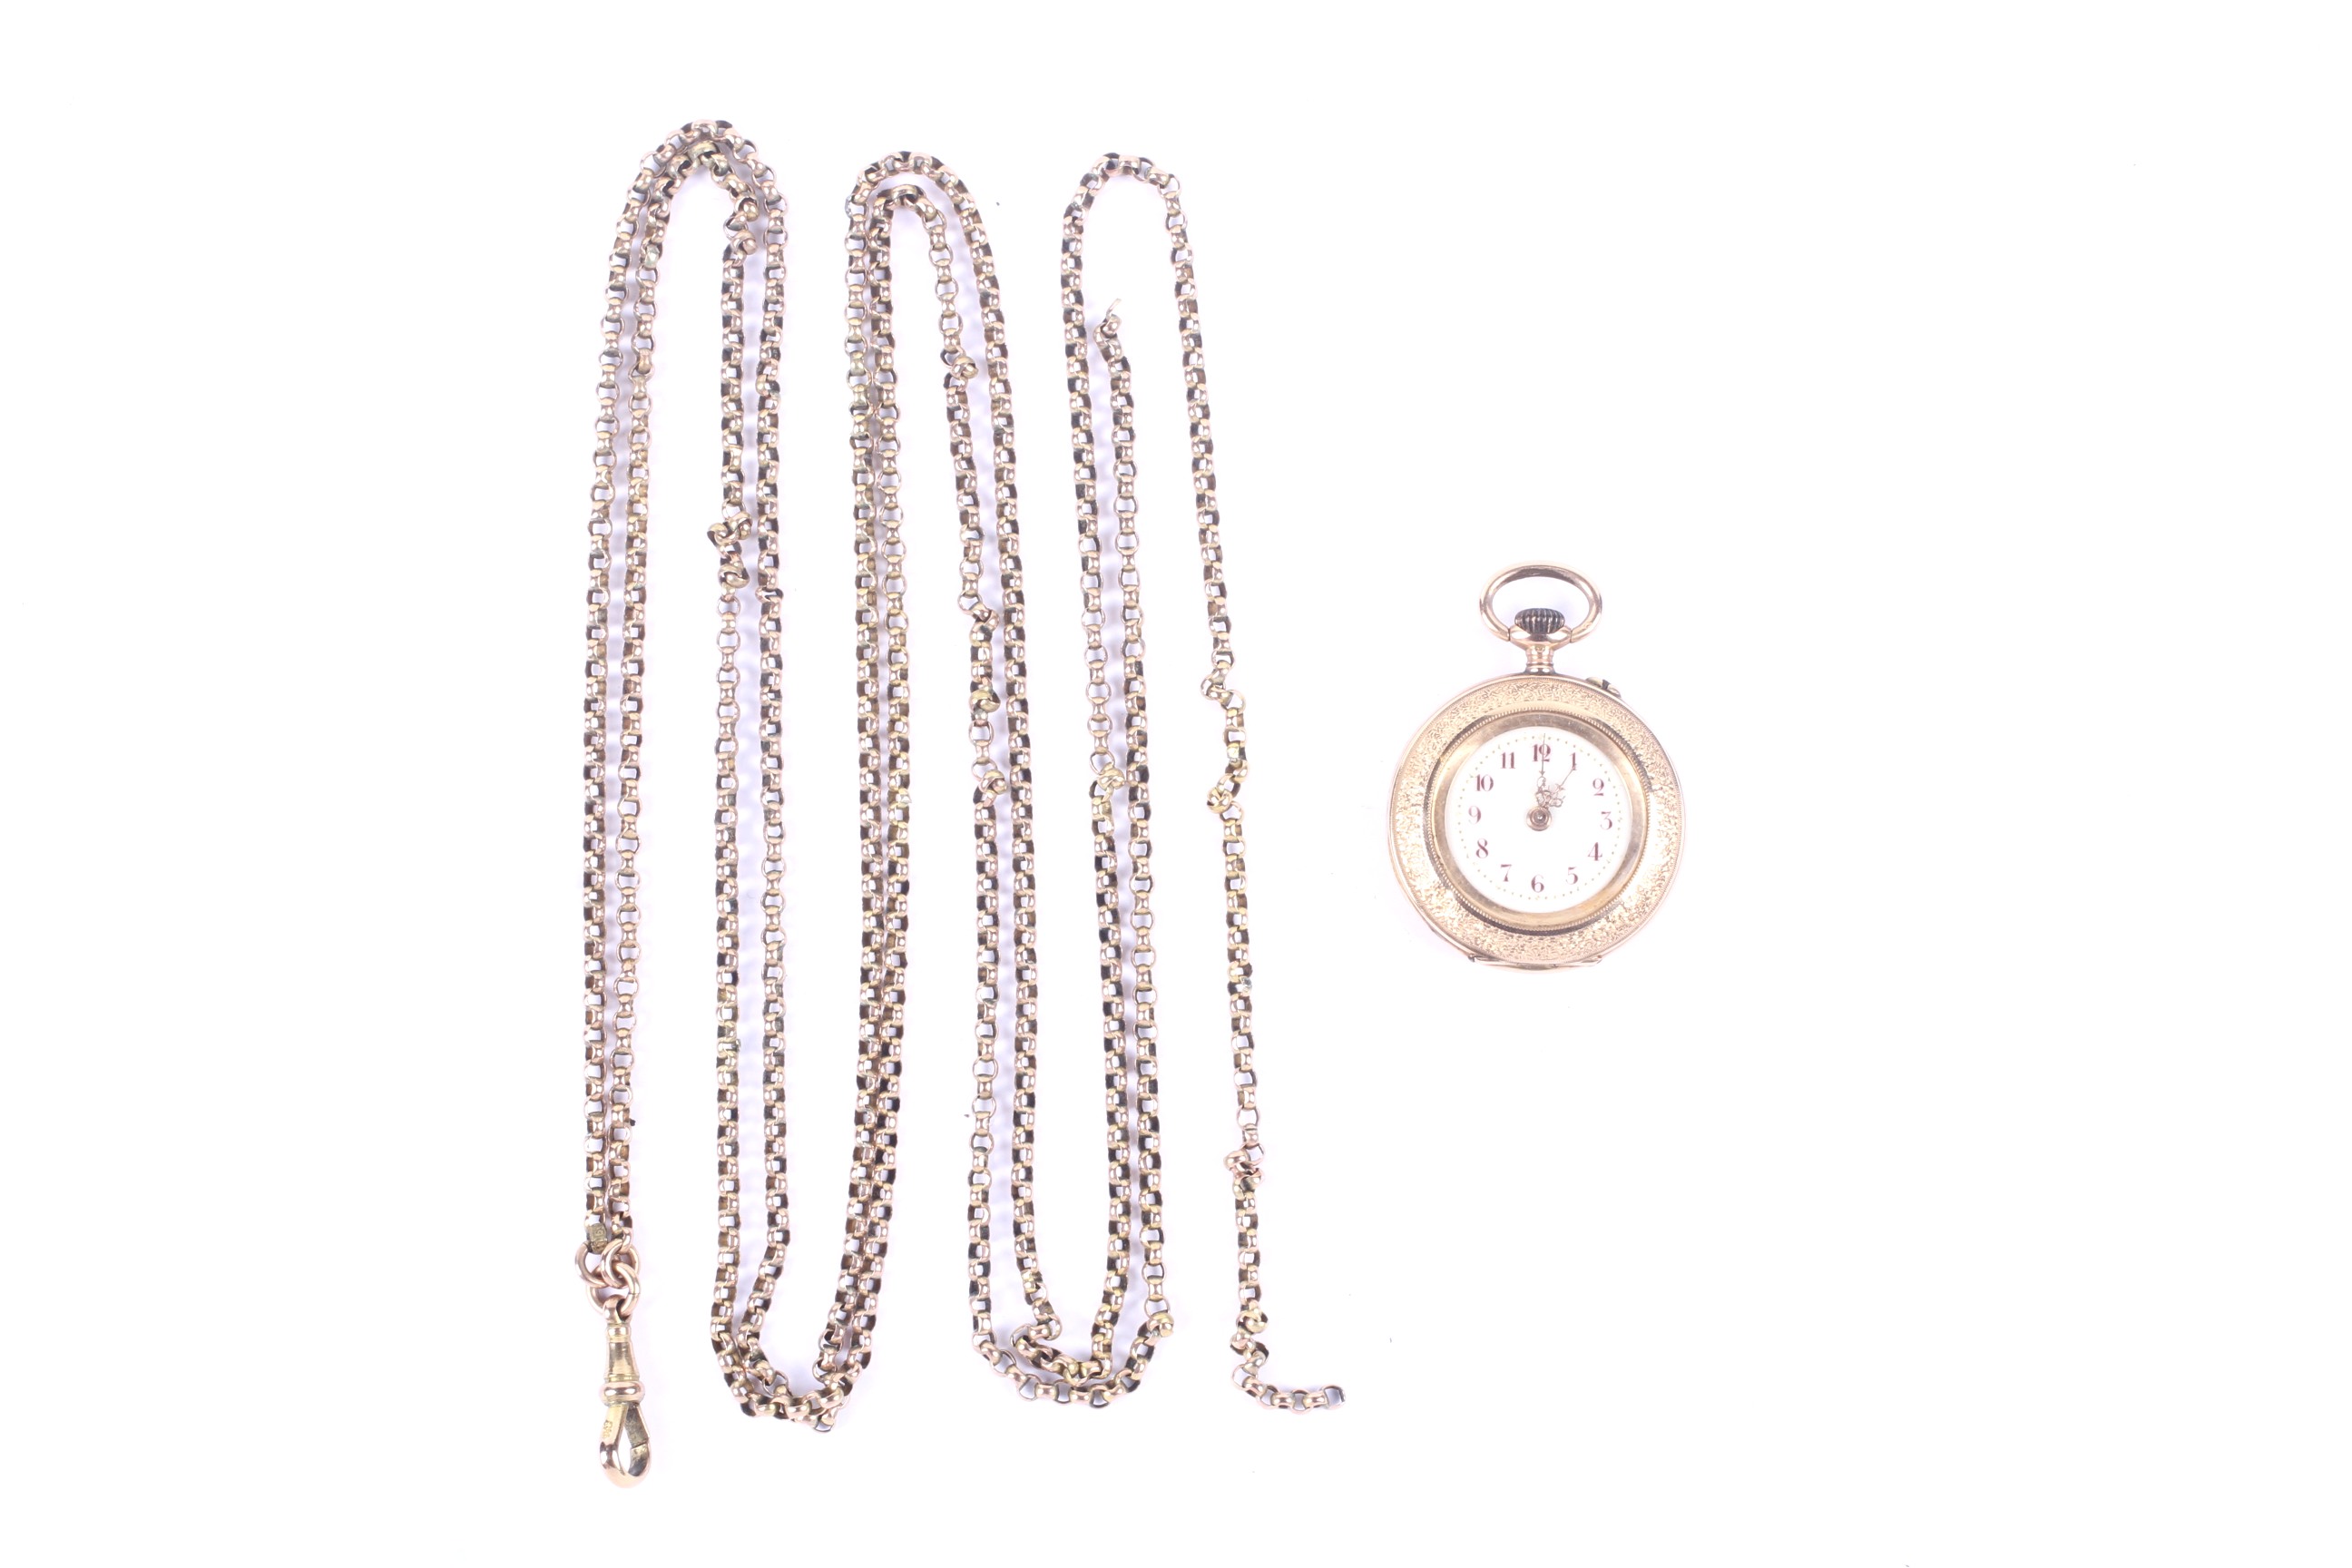 An early 20th century gold cased fob watch and a Victorian long guard chain.